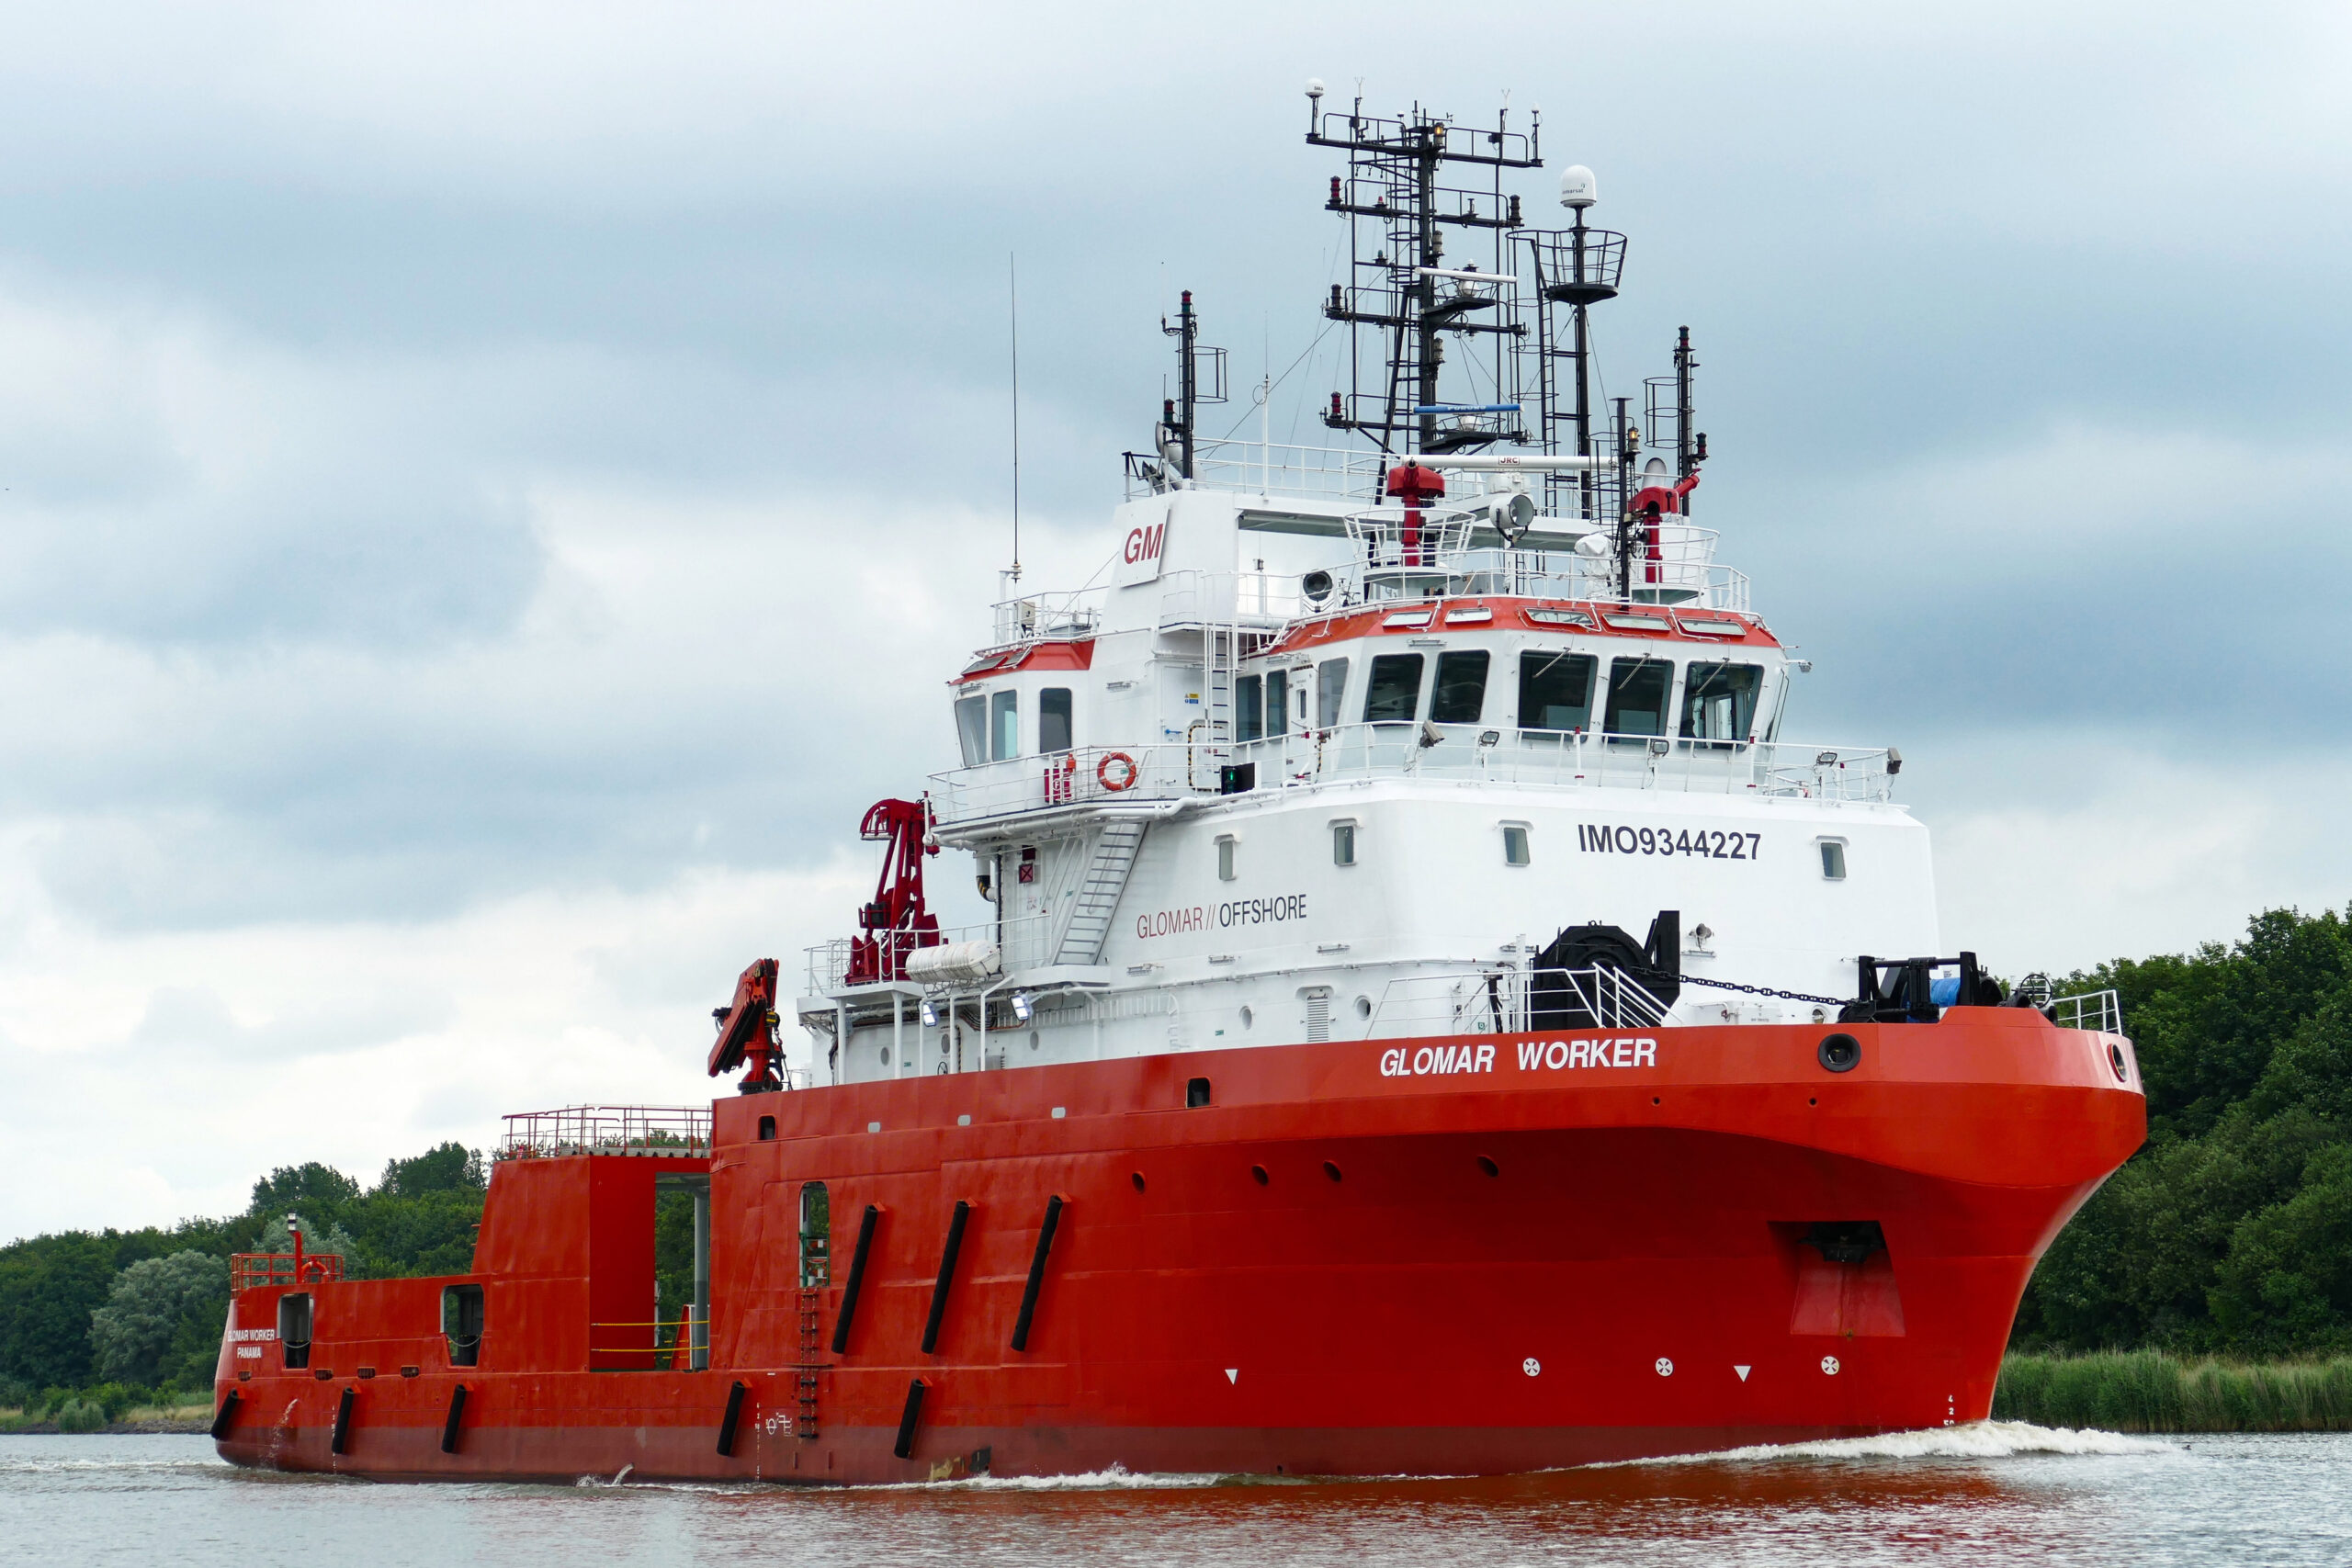 MEMBER NEWS: Rovco expands fleet with additional site survey vessel